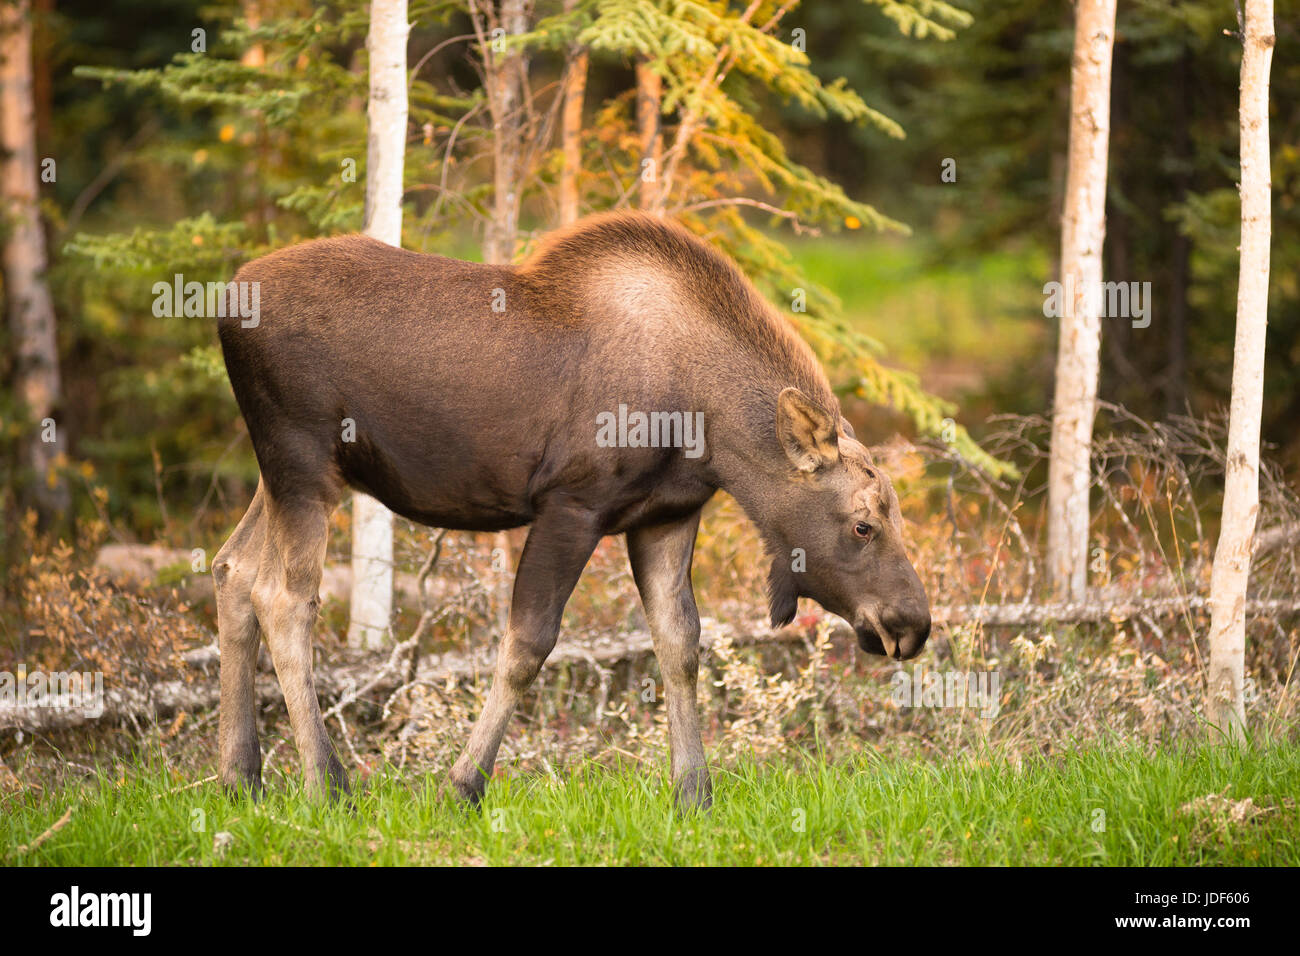 A young moose calf takes a moment to pause to check my position while grazing Stock Photo